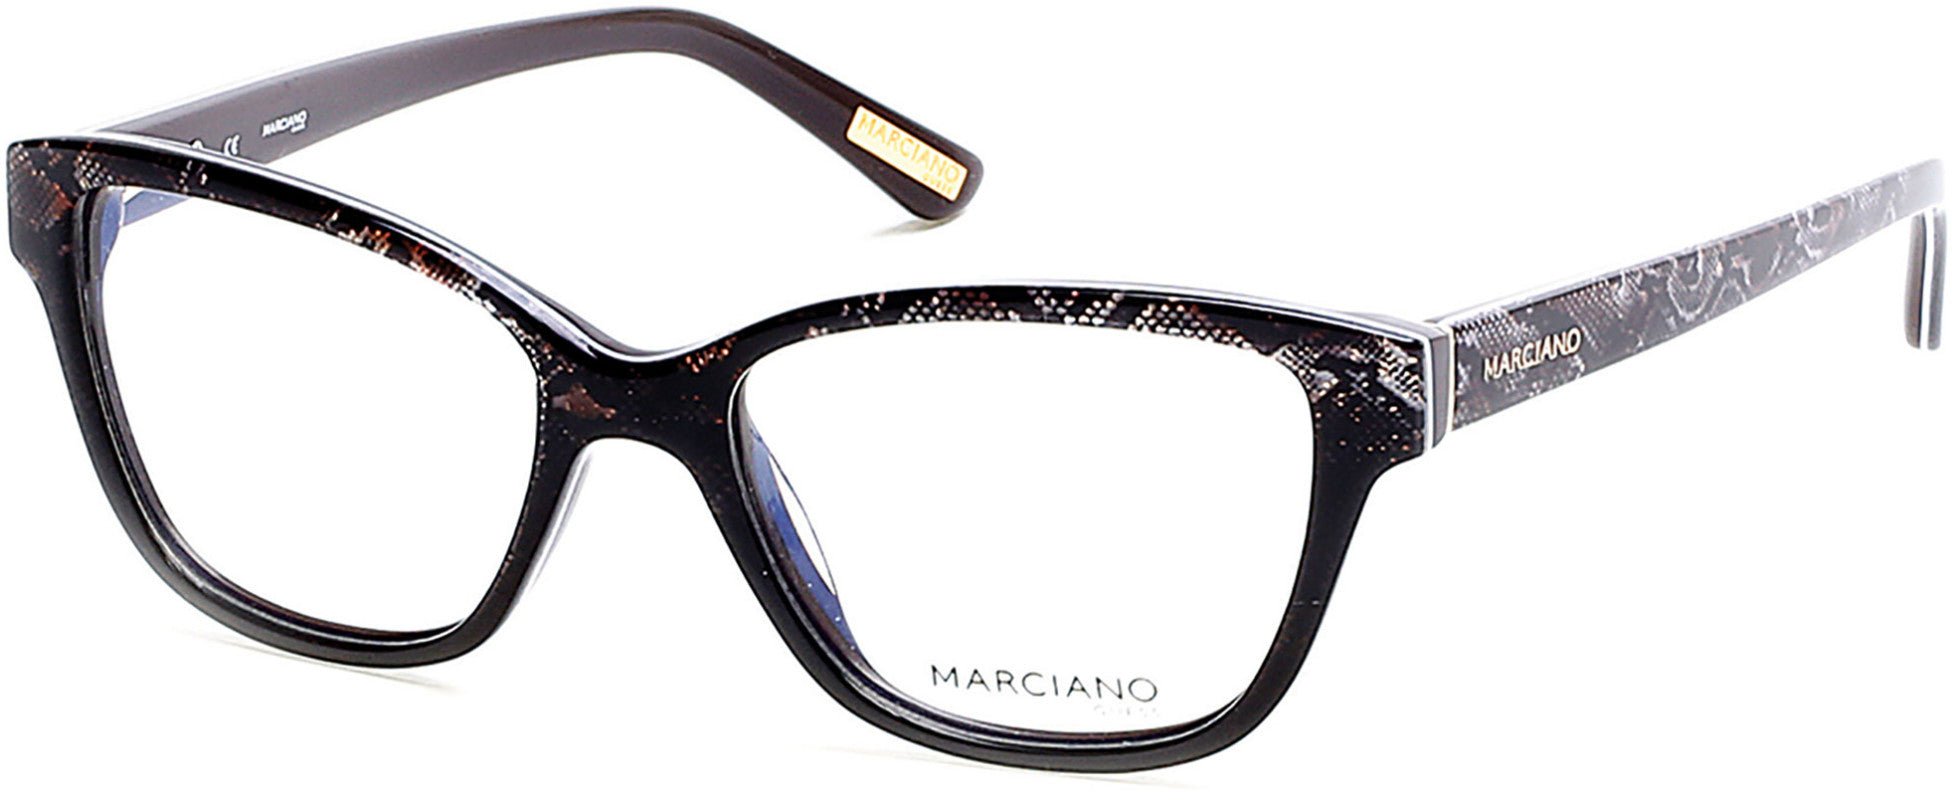 Guess By Marciano GM0280 Butterfly Eyeglasses 050-050 - Dark Brown/other